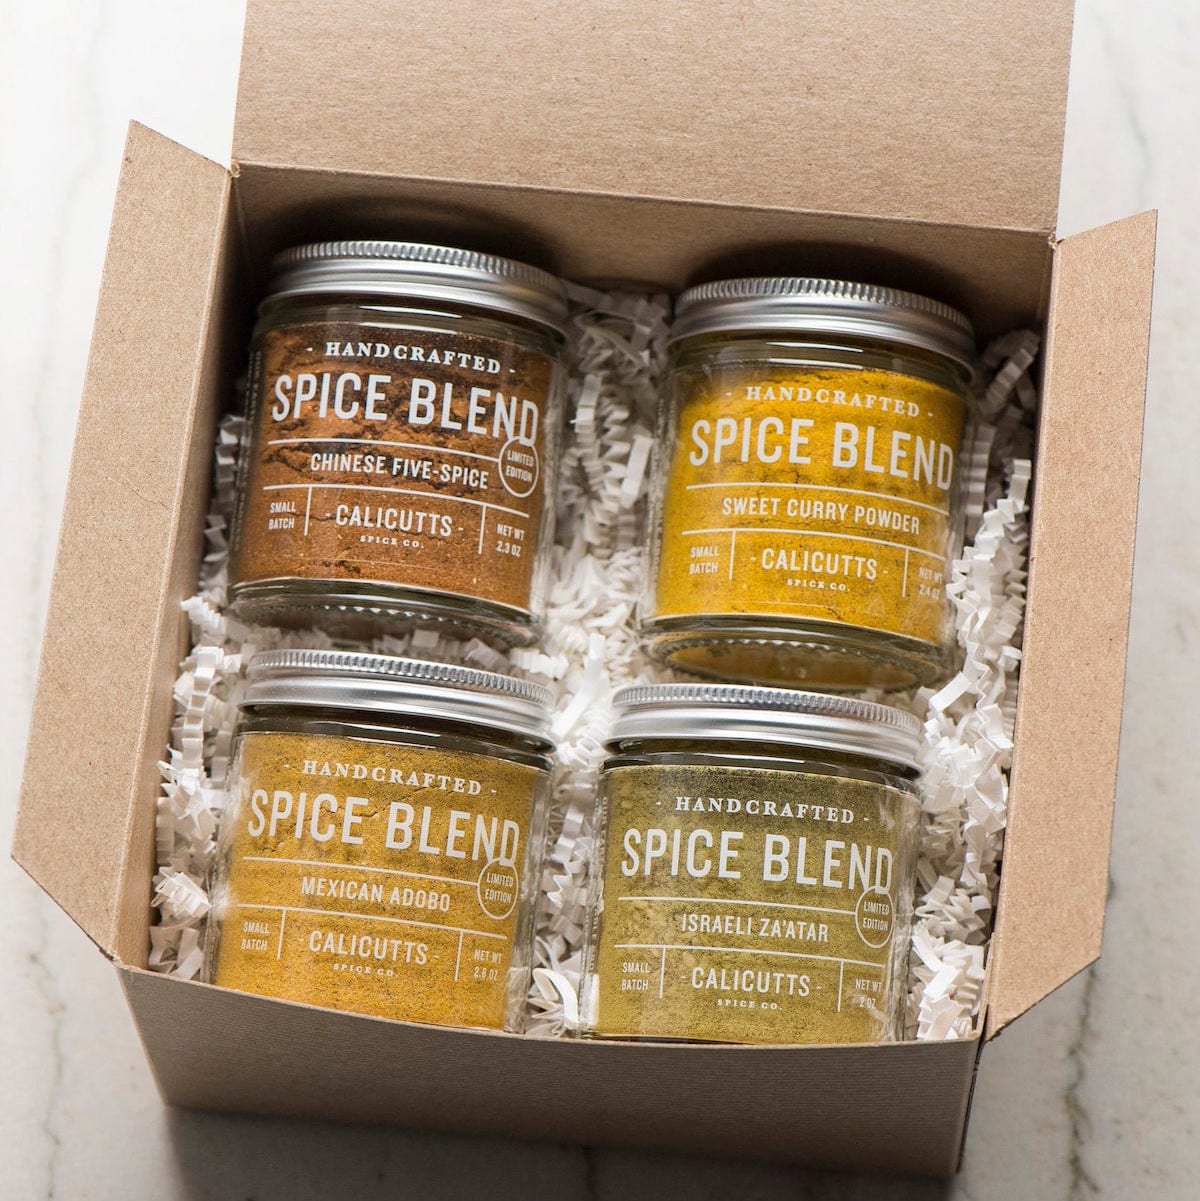 "World Traveler" spice gift set from Calicutts Spice Co.